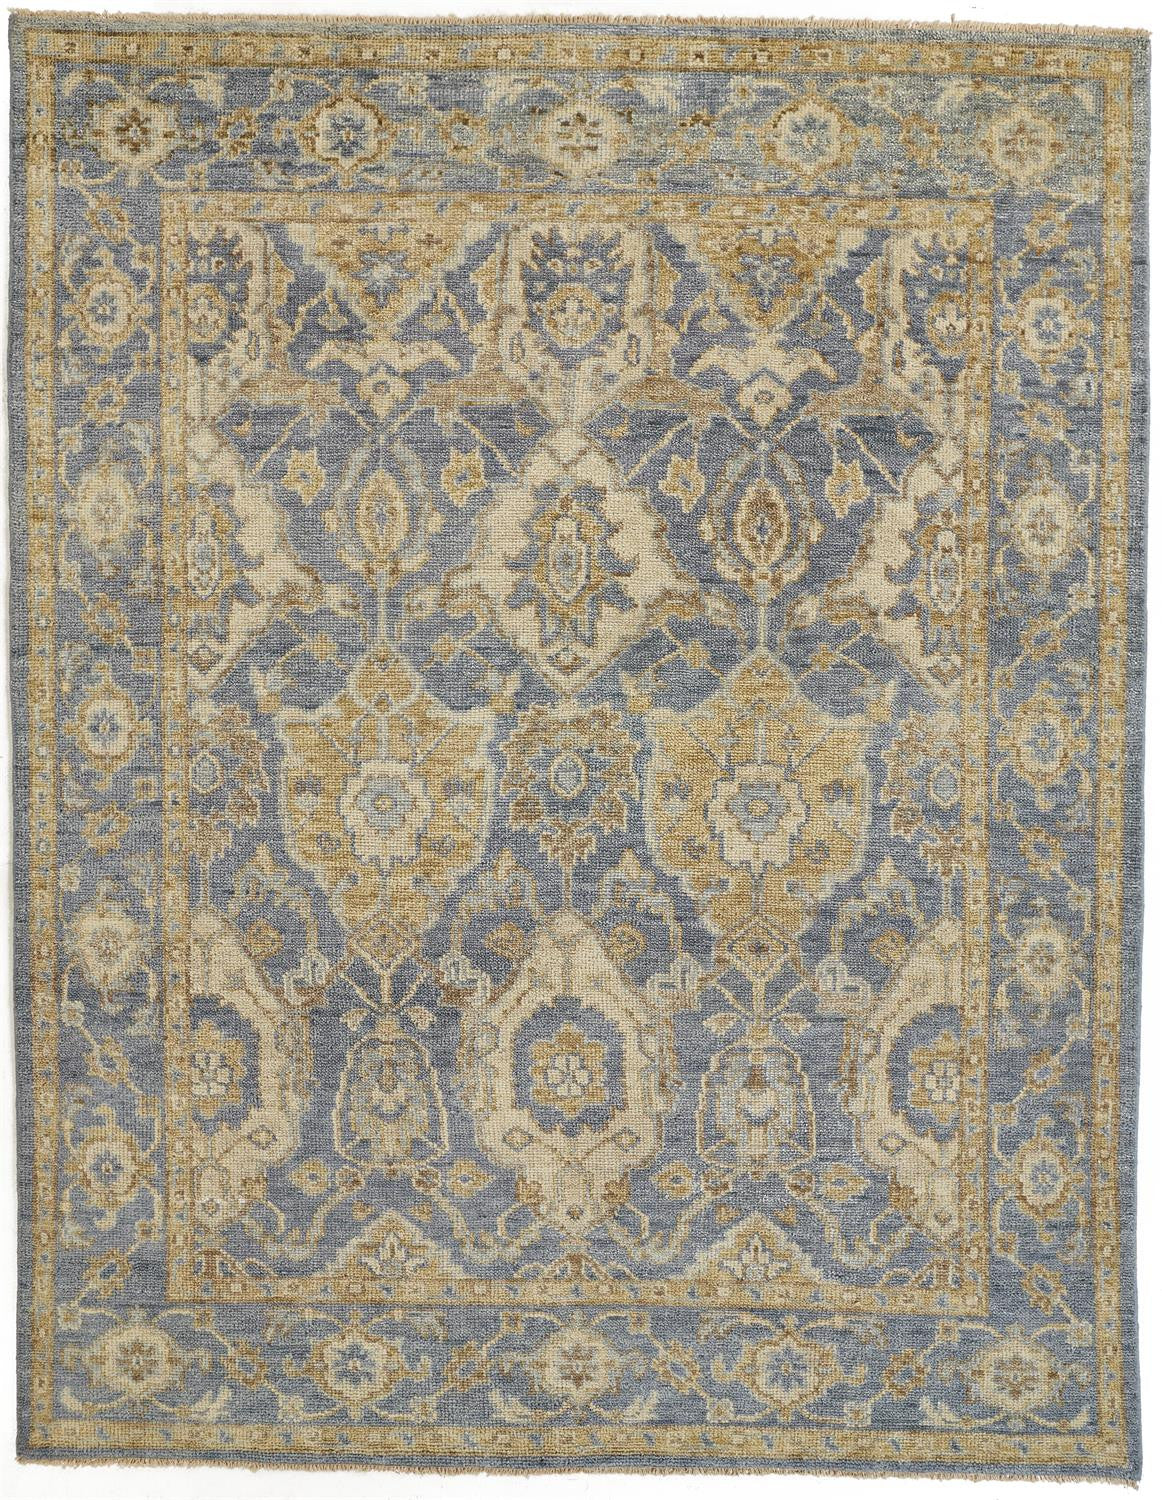 4' X 6' Blue Gold And Tan Wool Floral Hand Knotted Stain Resistant Area Rug With Fringe